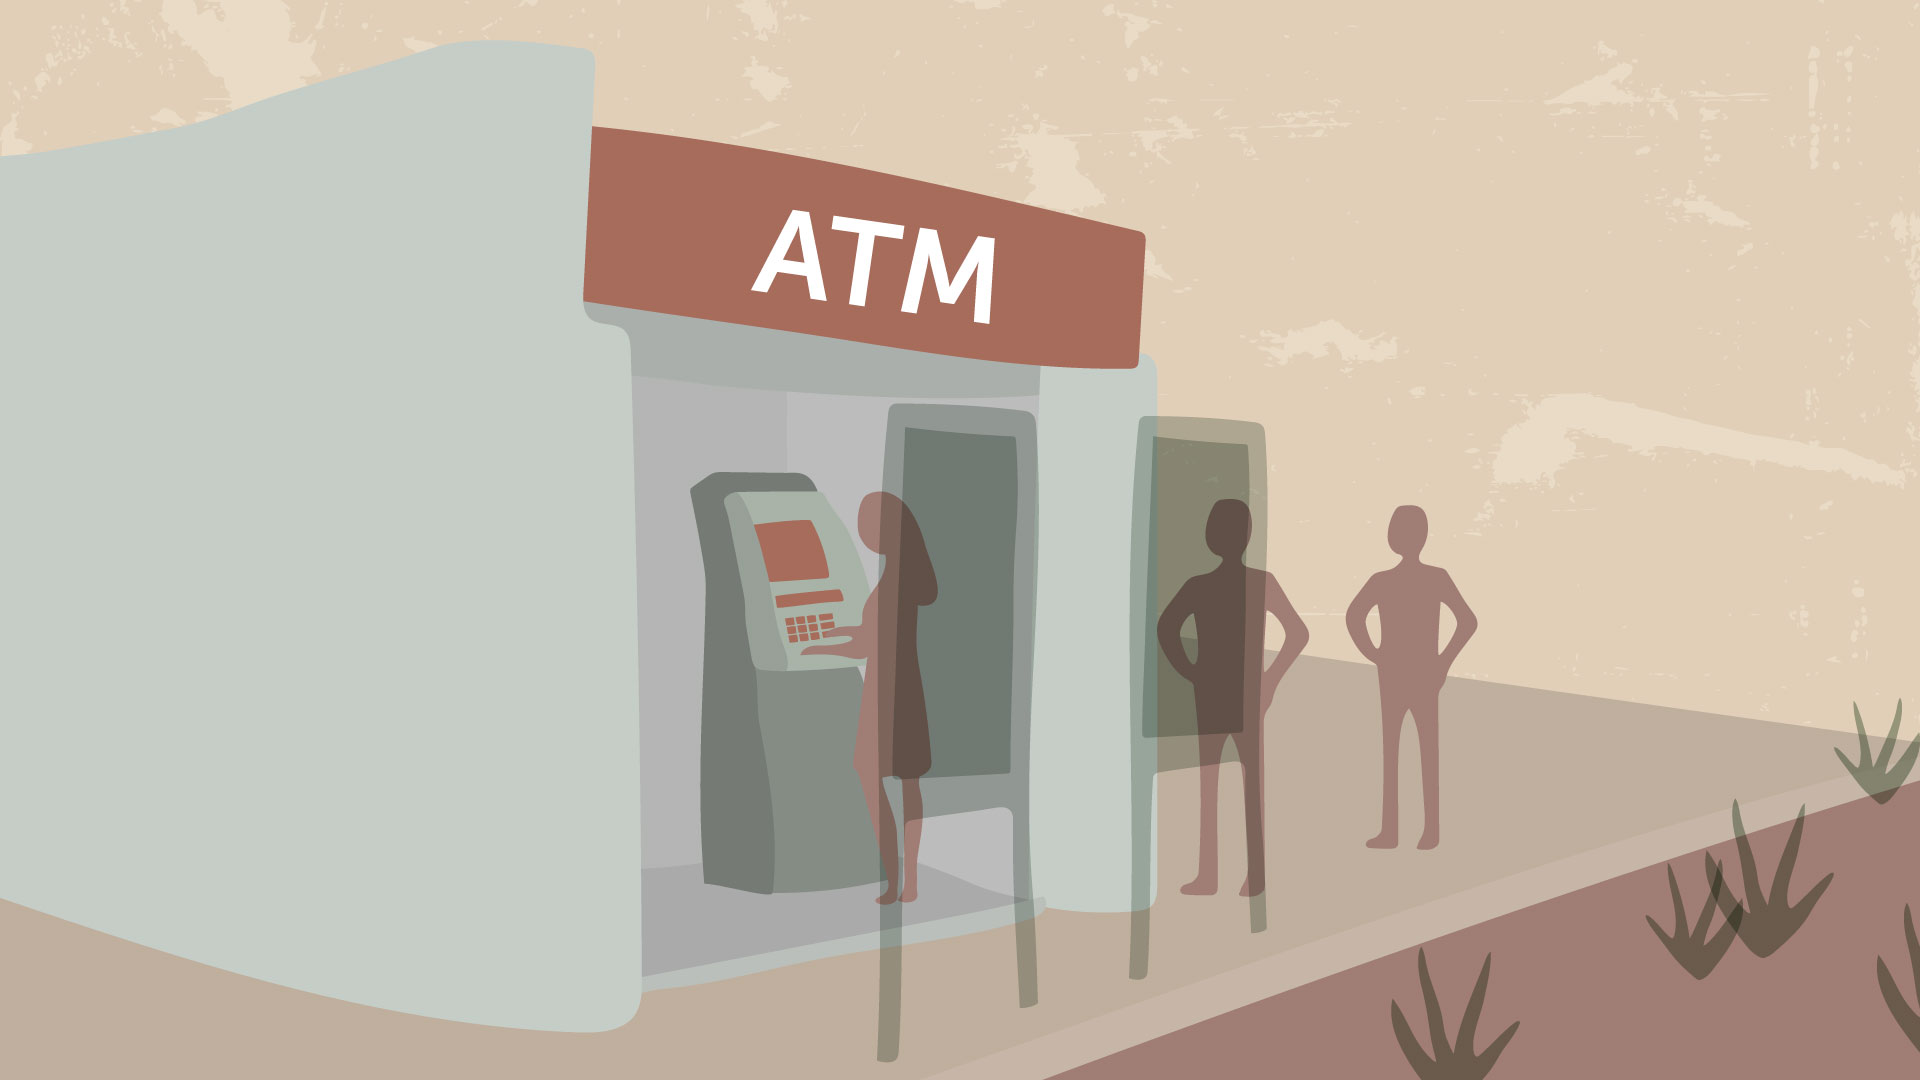 A queue forms at the ATM.